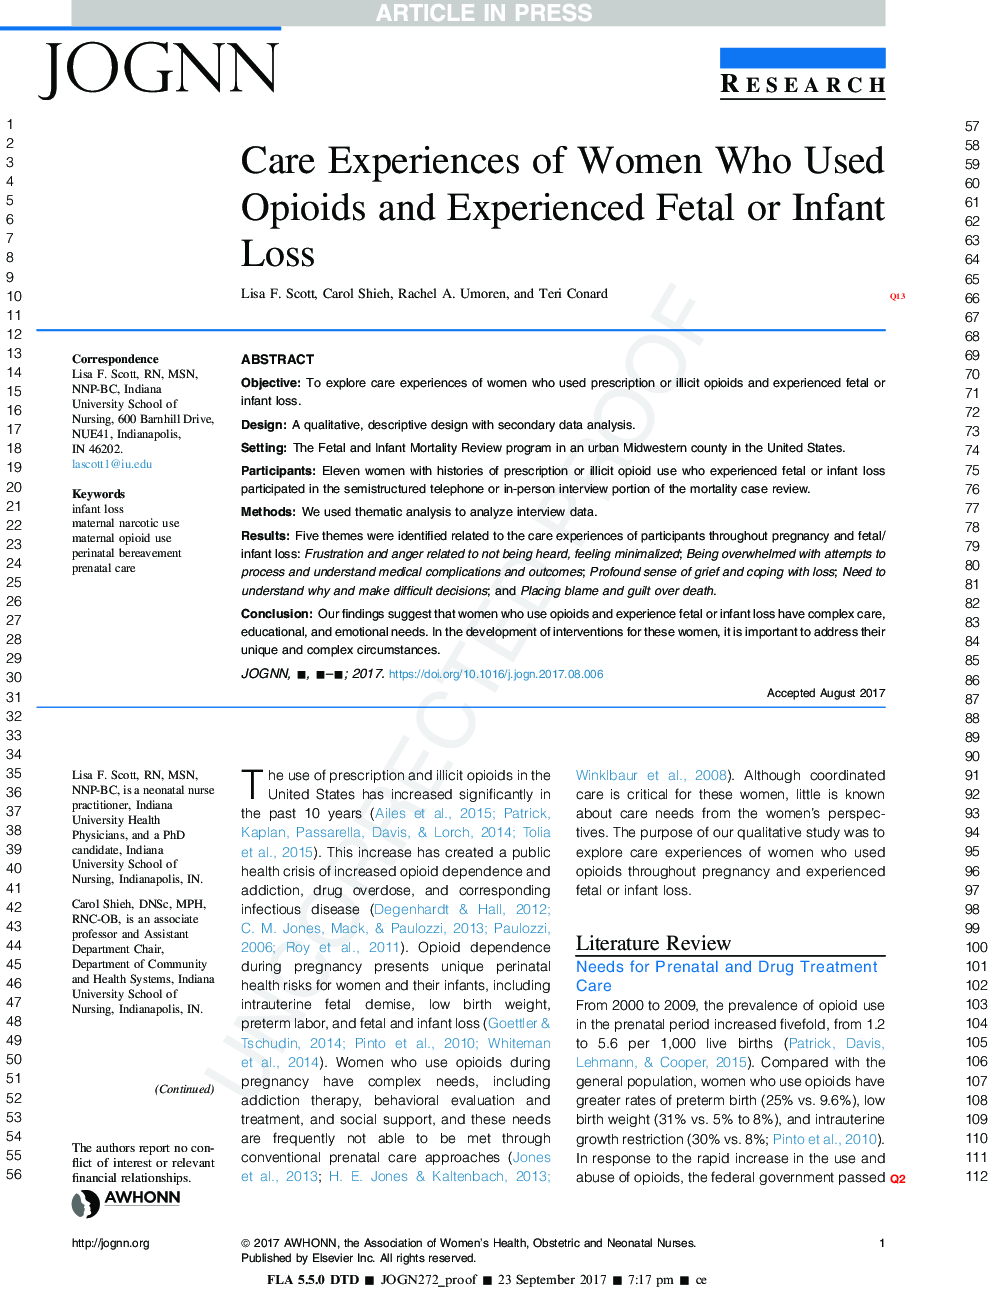 Care Experiences of Women Who Used Opioids and Experienced Fetal or Infant Loss